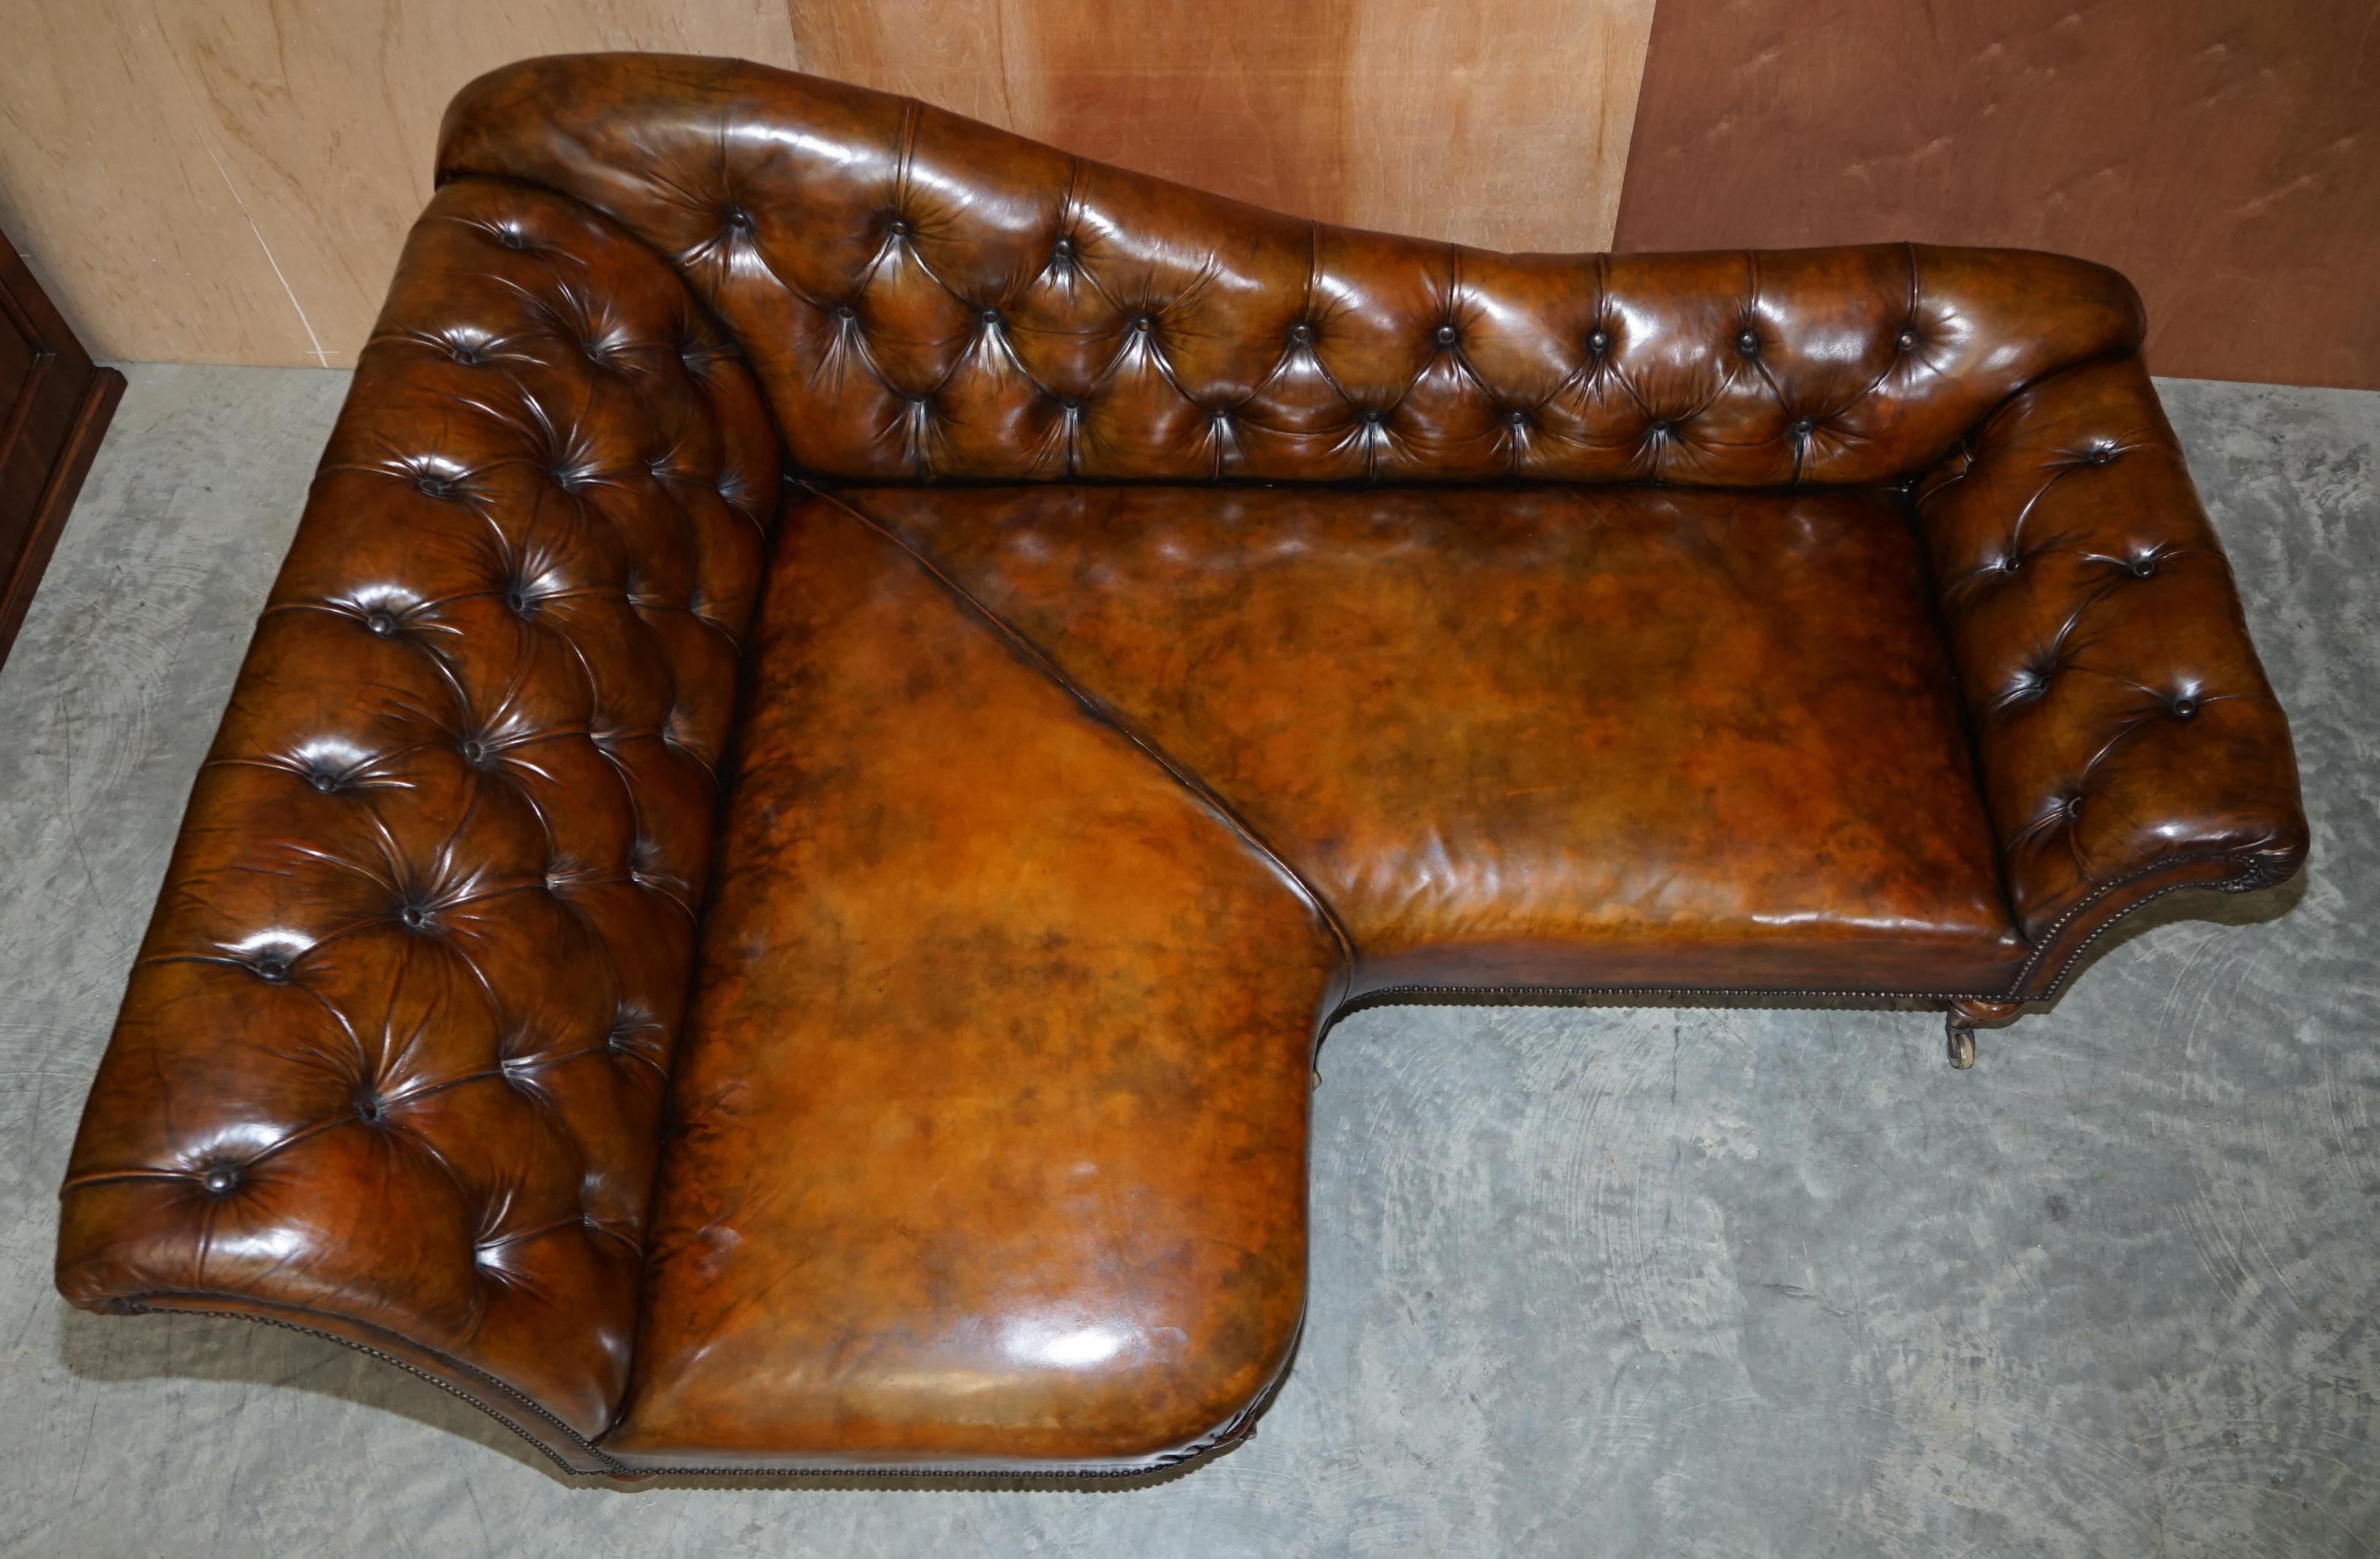 Hand-Crafted Restored Victorian Howard & Son's Chesterfield Brown Leather Corner Sofa Chaise